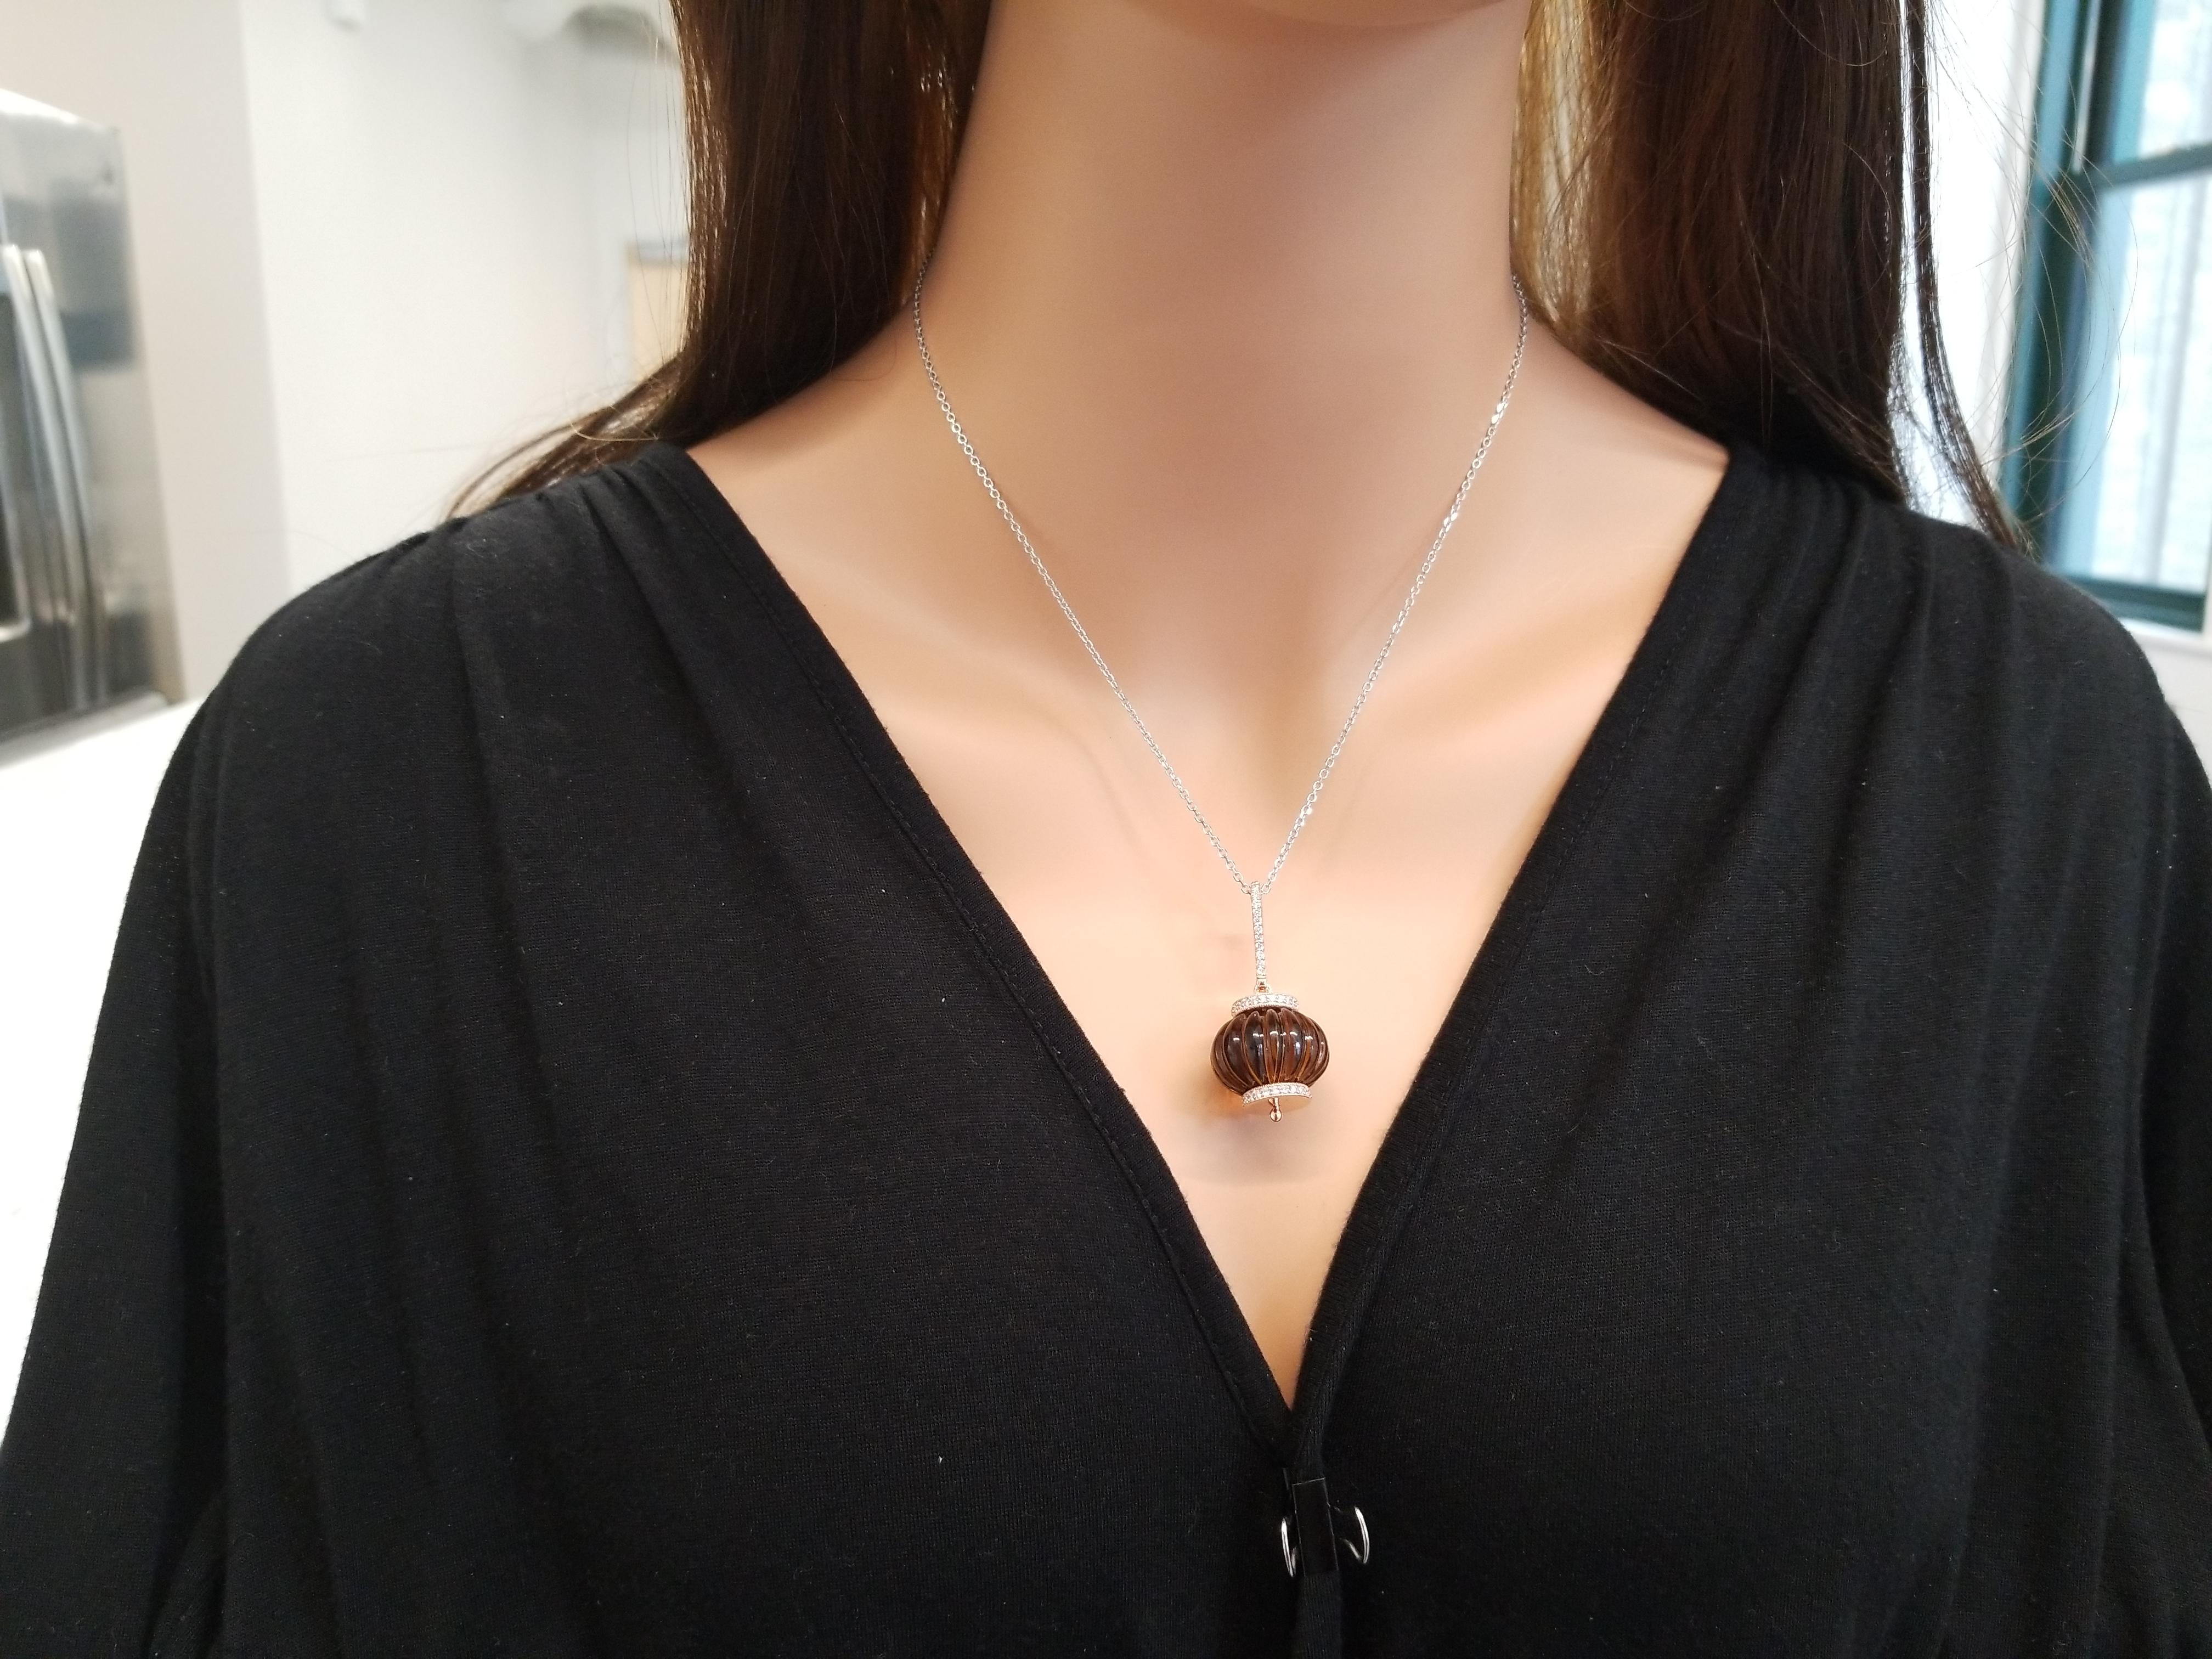 A 60 carat hand-carved, barrel shaped smoky quartz gem is an absolutely chic and fun necklace. The gem source is Brazil. Sparkling round brilliant cut diamonds are bead set in roundels hugging the impressive gem as well as diamonds fashioned linear